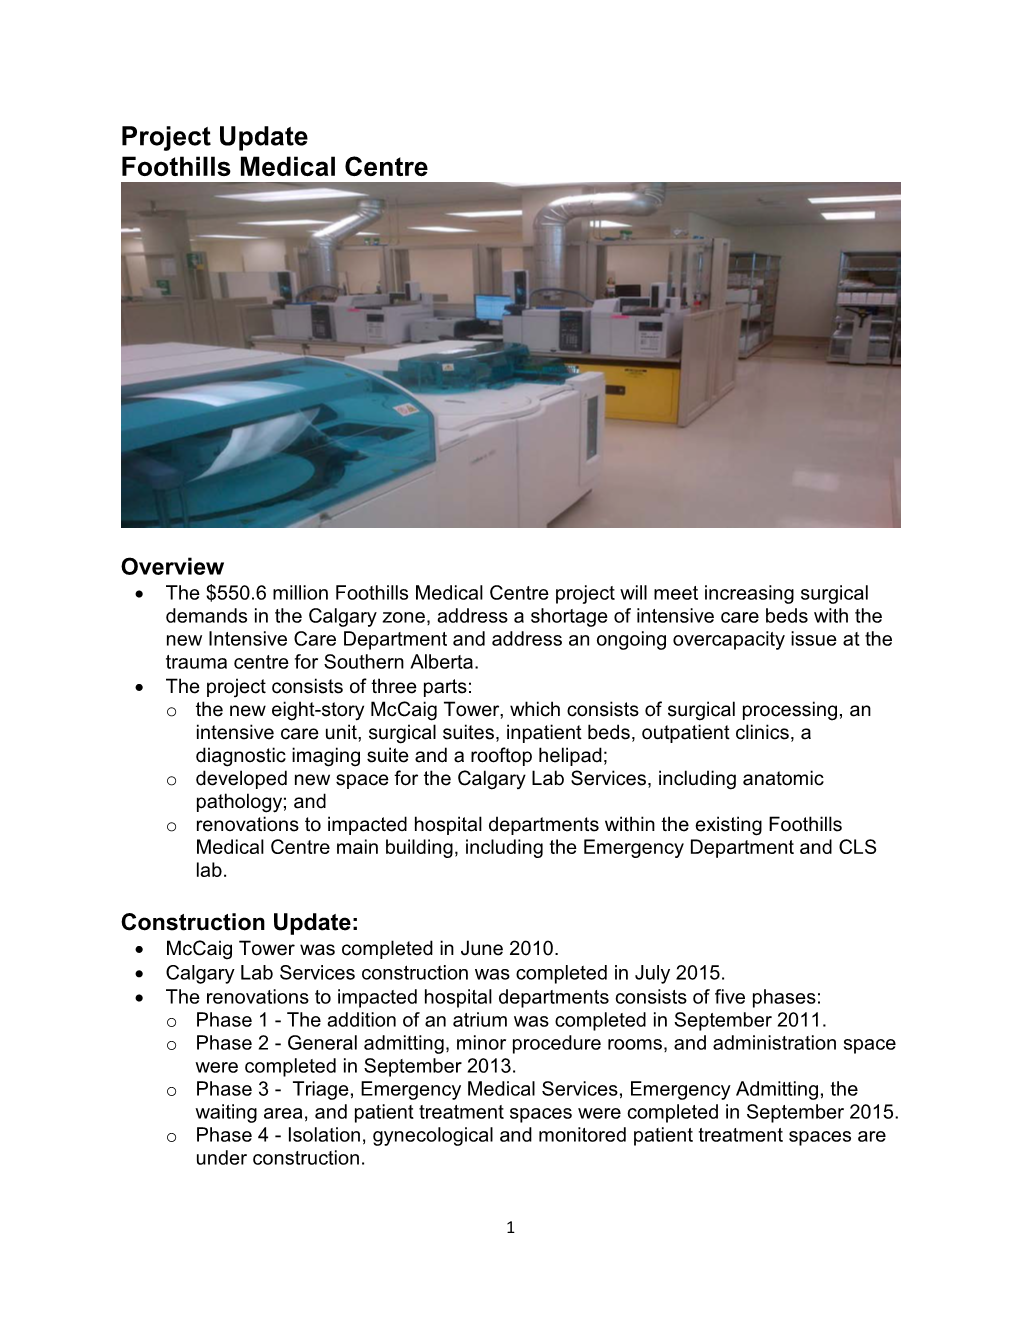 Project Update Foothills Medical Centre